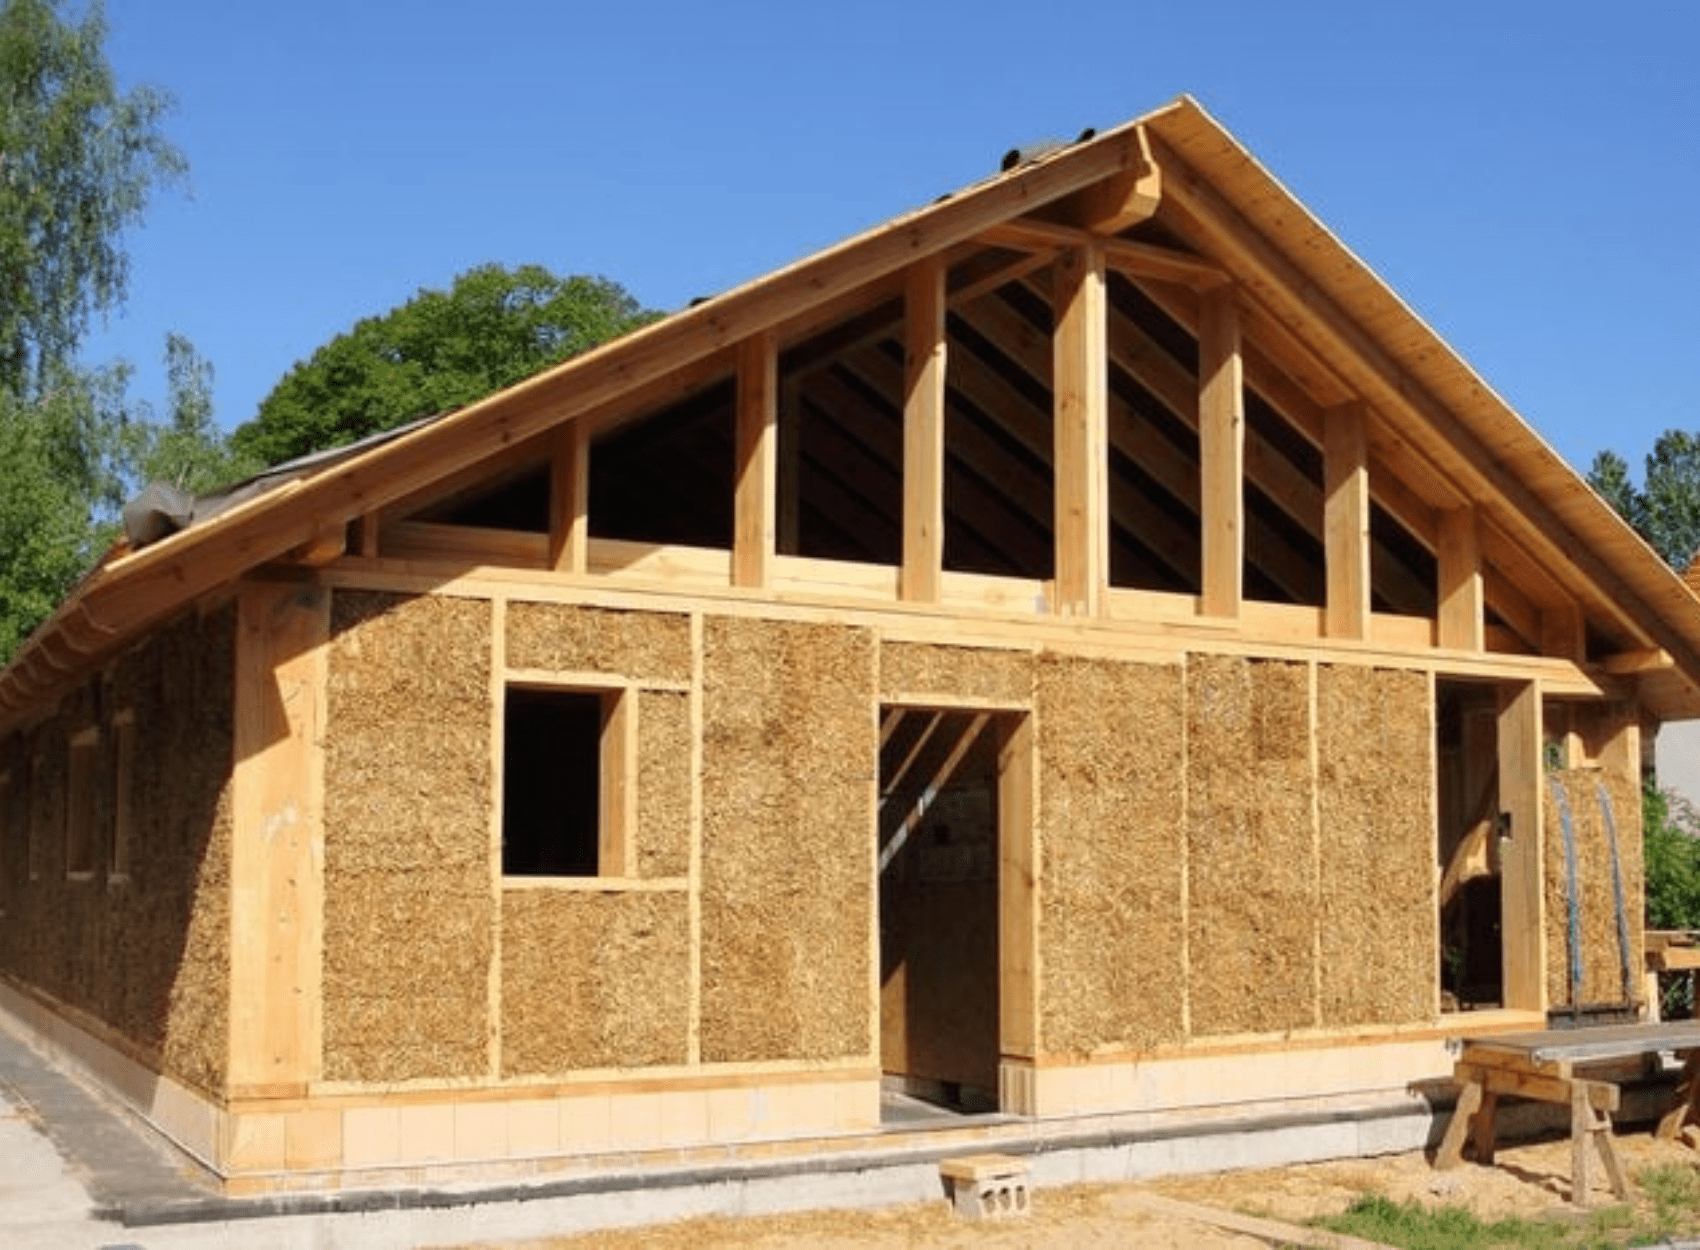 Using straw bales as a sustainable building material